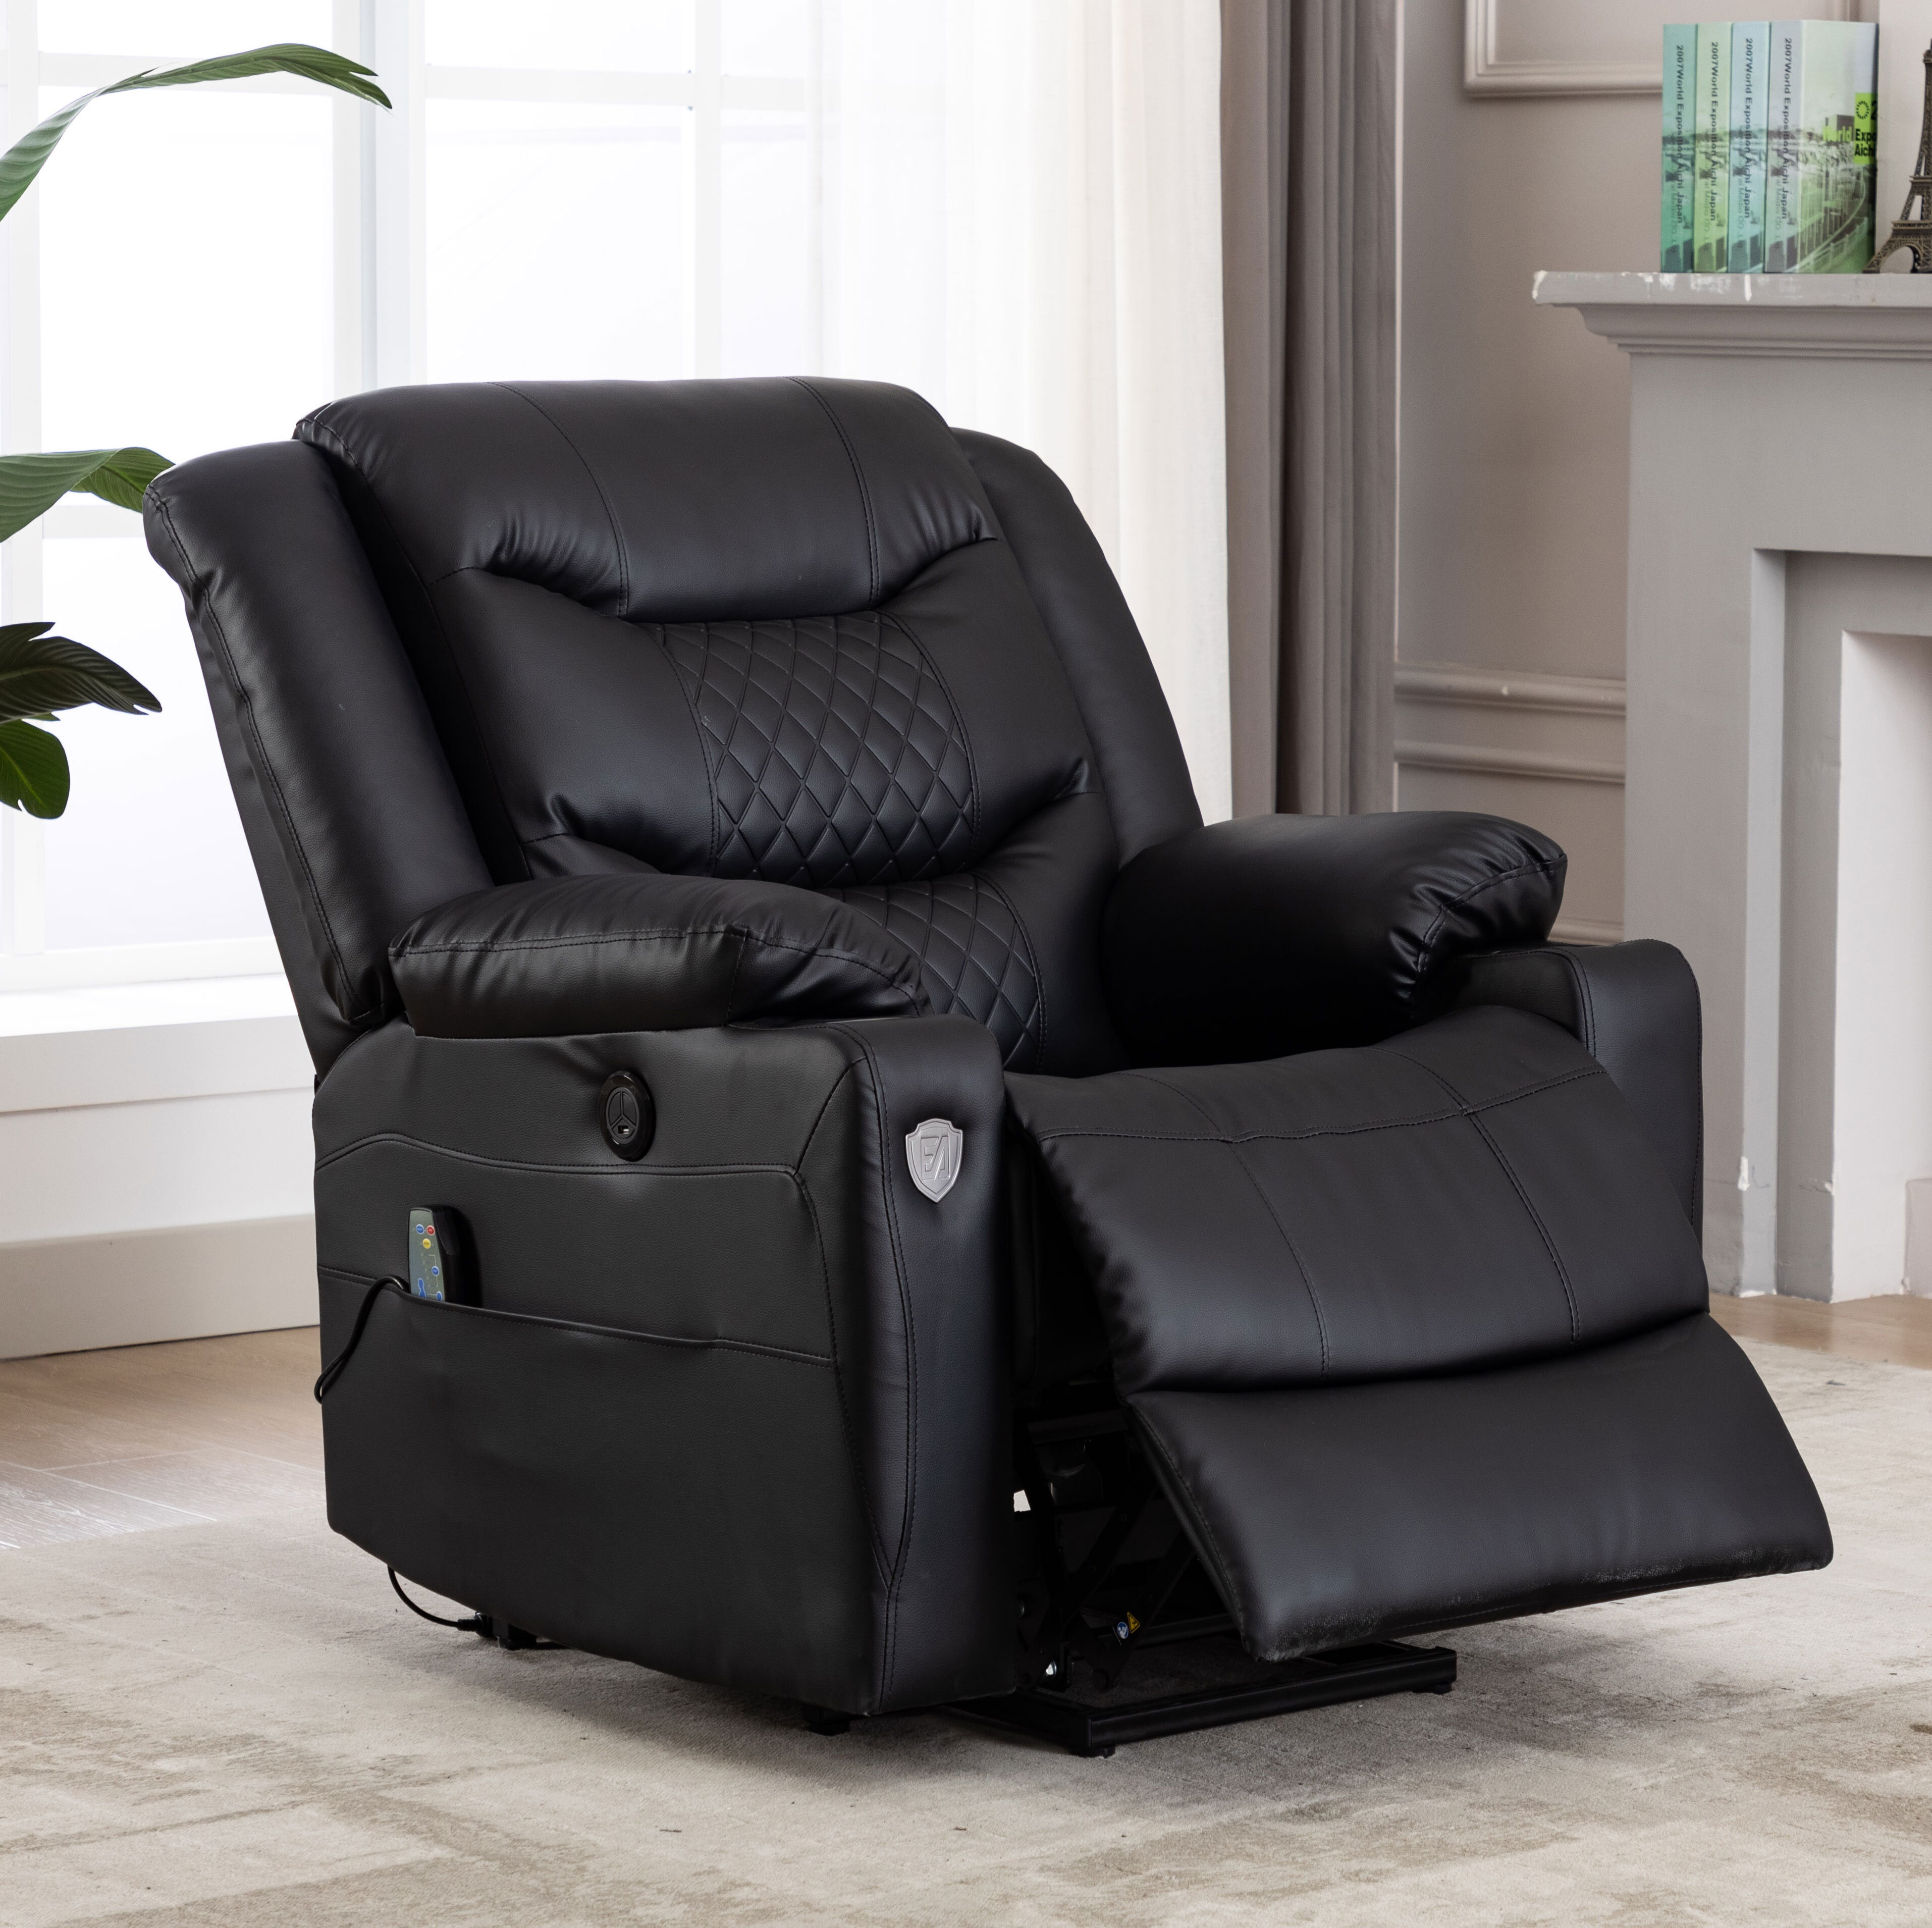  Vive Compact Lift Chair - Power Massage Recliner for